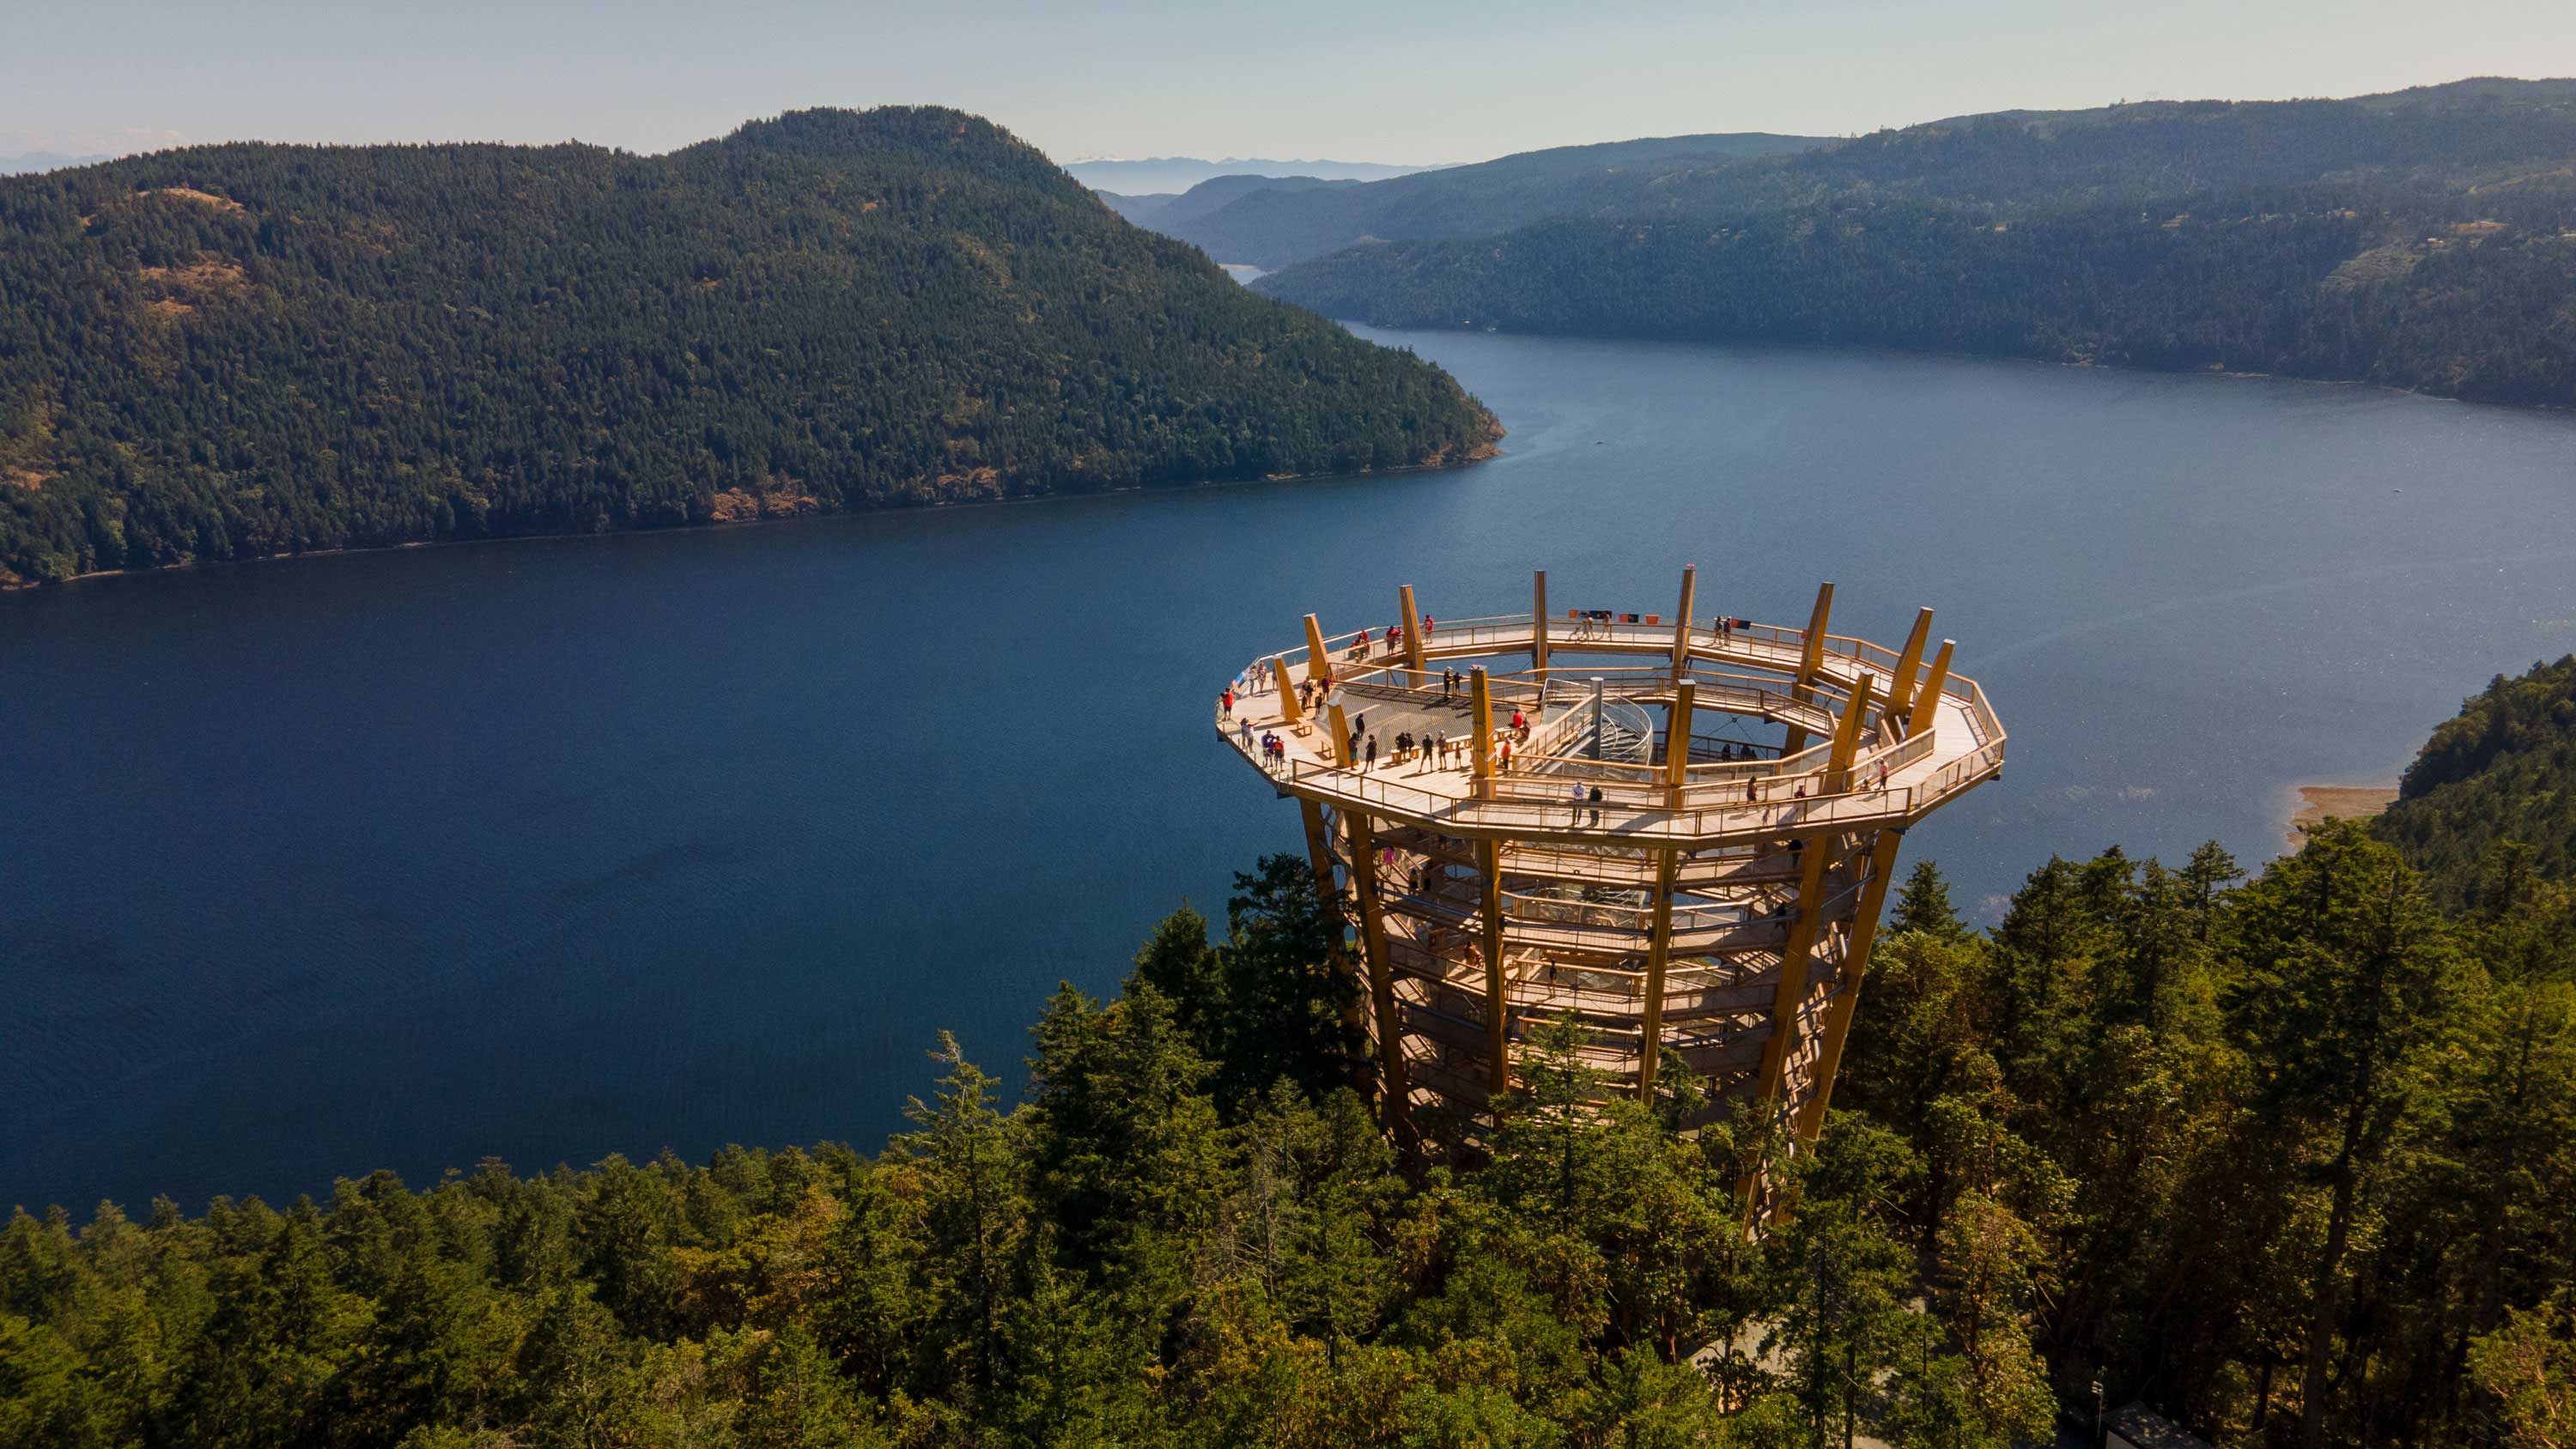 Malahat SkyWalk offers the ultimate Island experience where explorers of all ages can enjoy breathtaking views and adventure, high among the trees and surrounded by the sea.